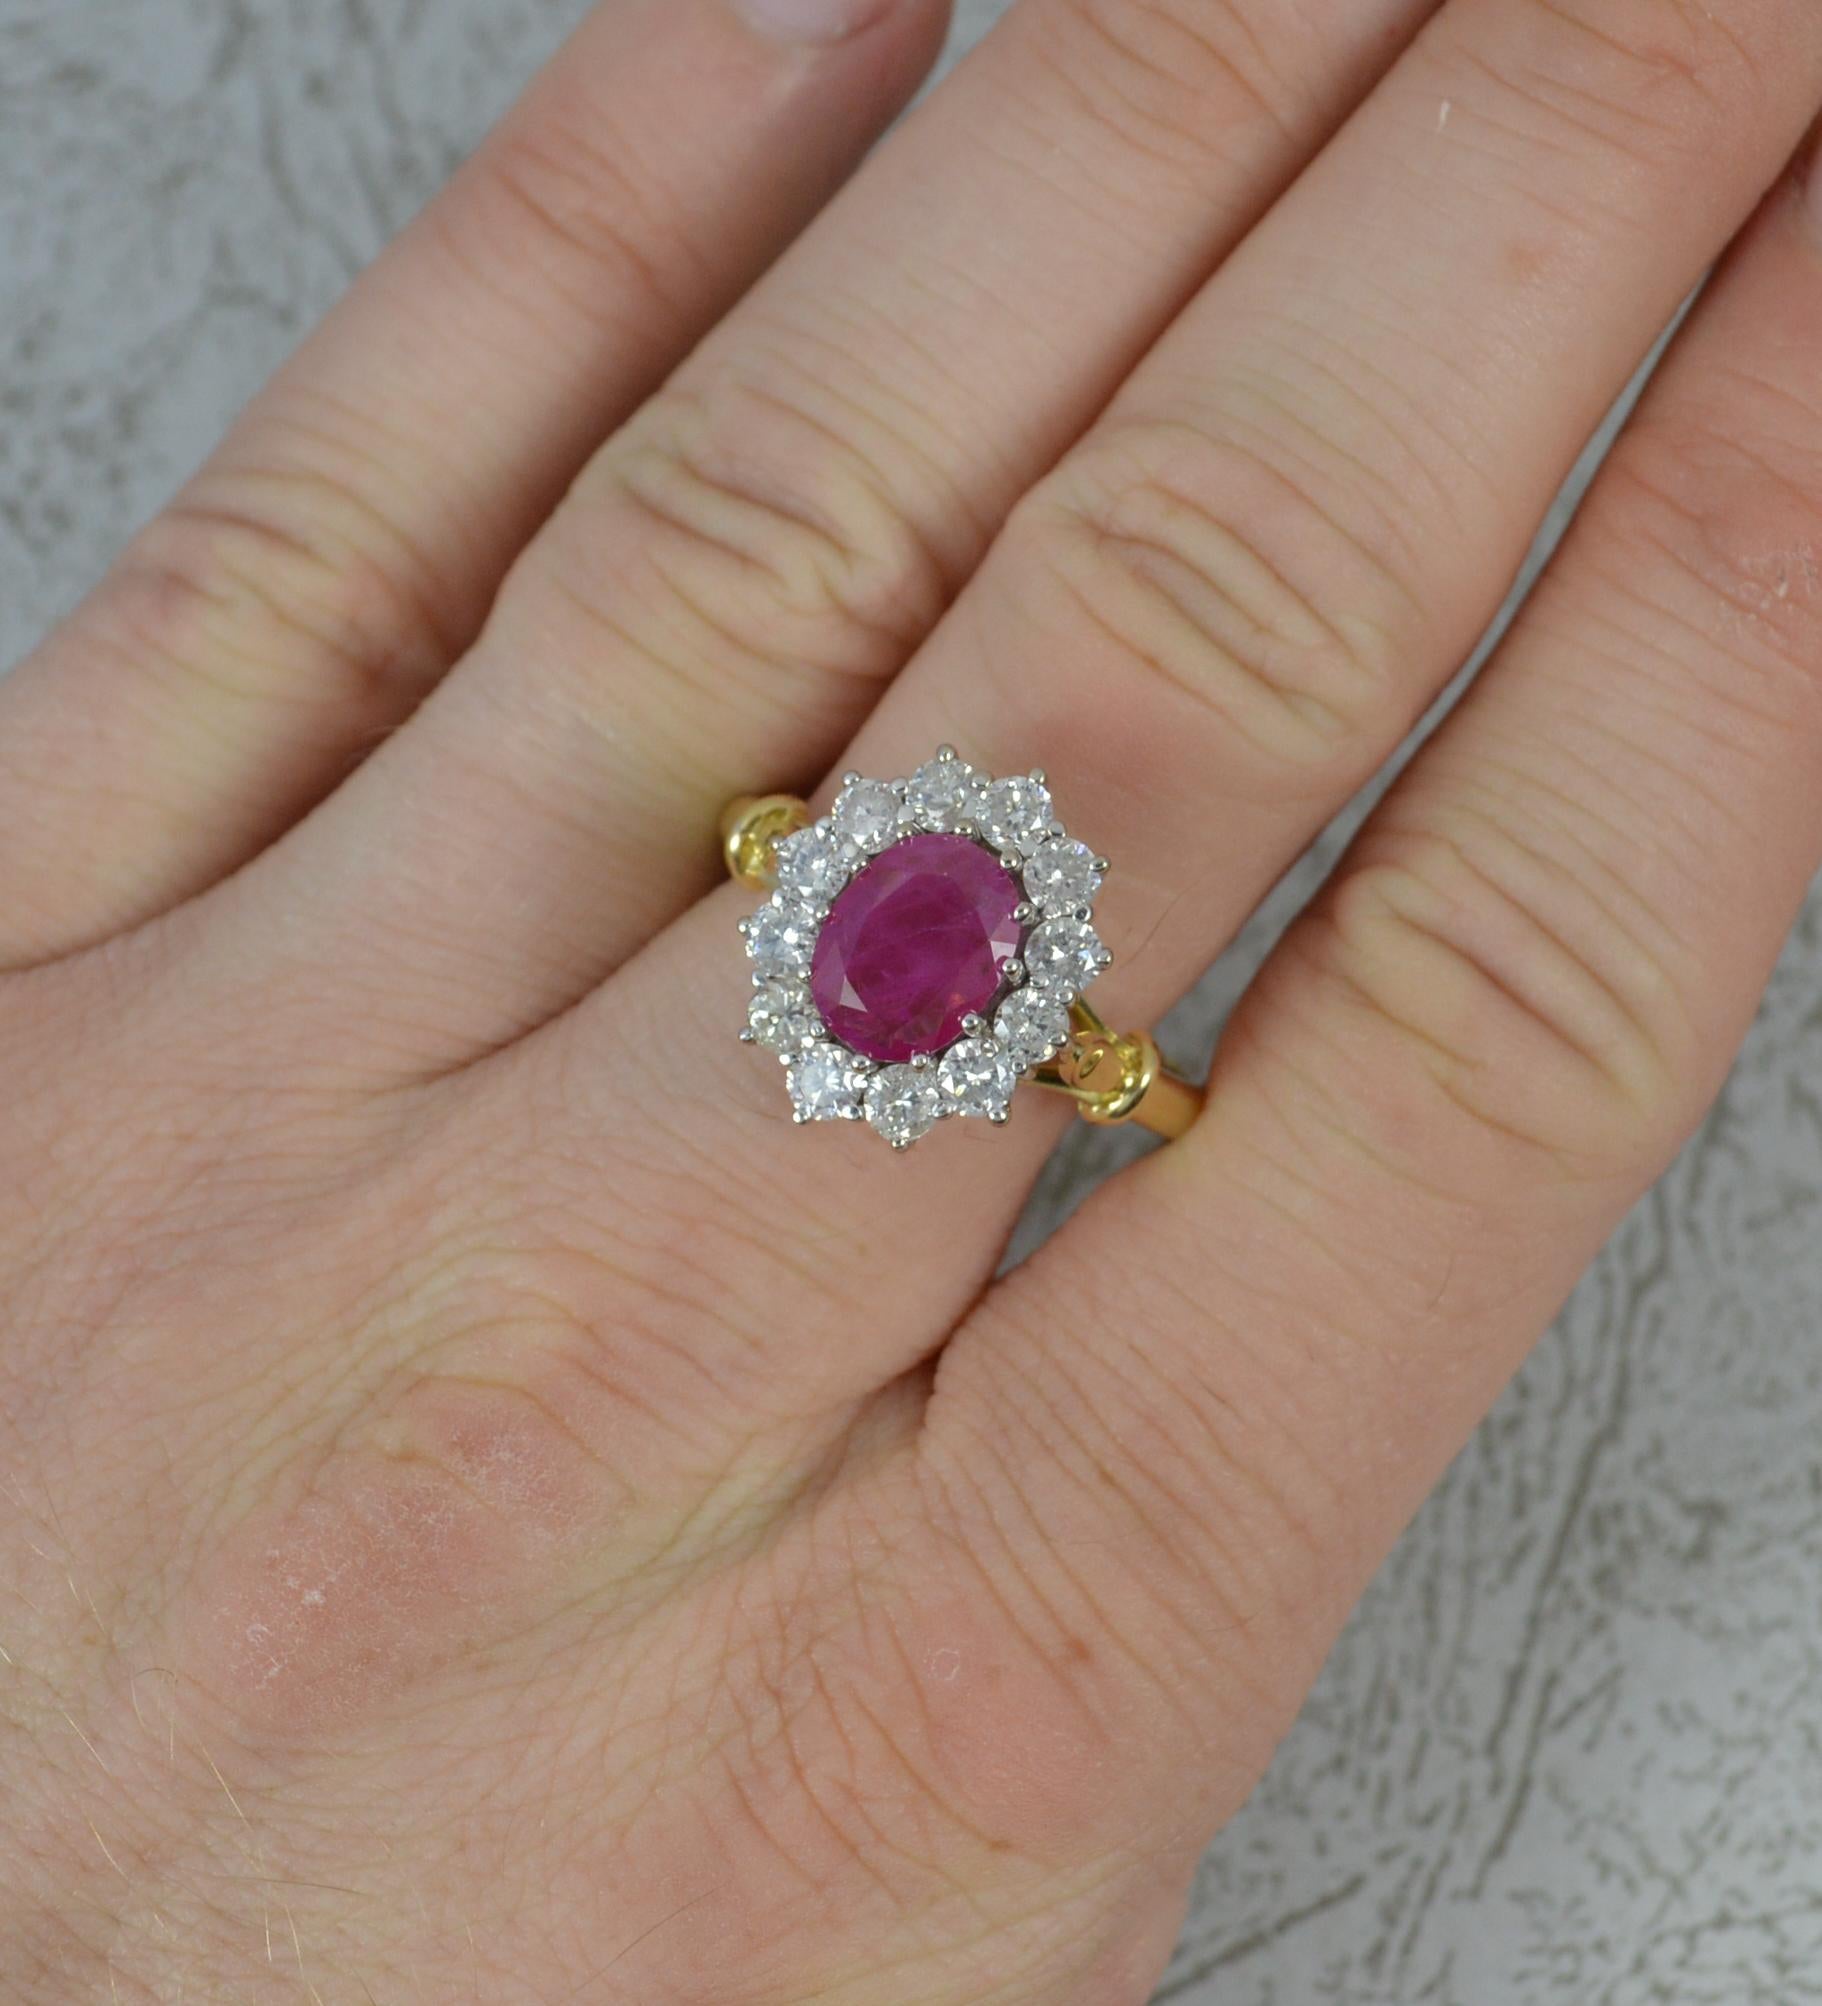 A beautiful classic Ruby and Diamond ring.
Solid 18 carat yellow gold shank and white gold head setting.
Designed with an oval cut ruby, 7mm x 9mm in multi claw setting with a full border of 12 natural round brilliant cut diamonds to total 1.20